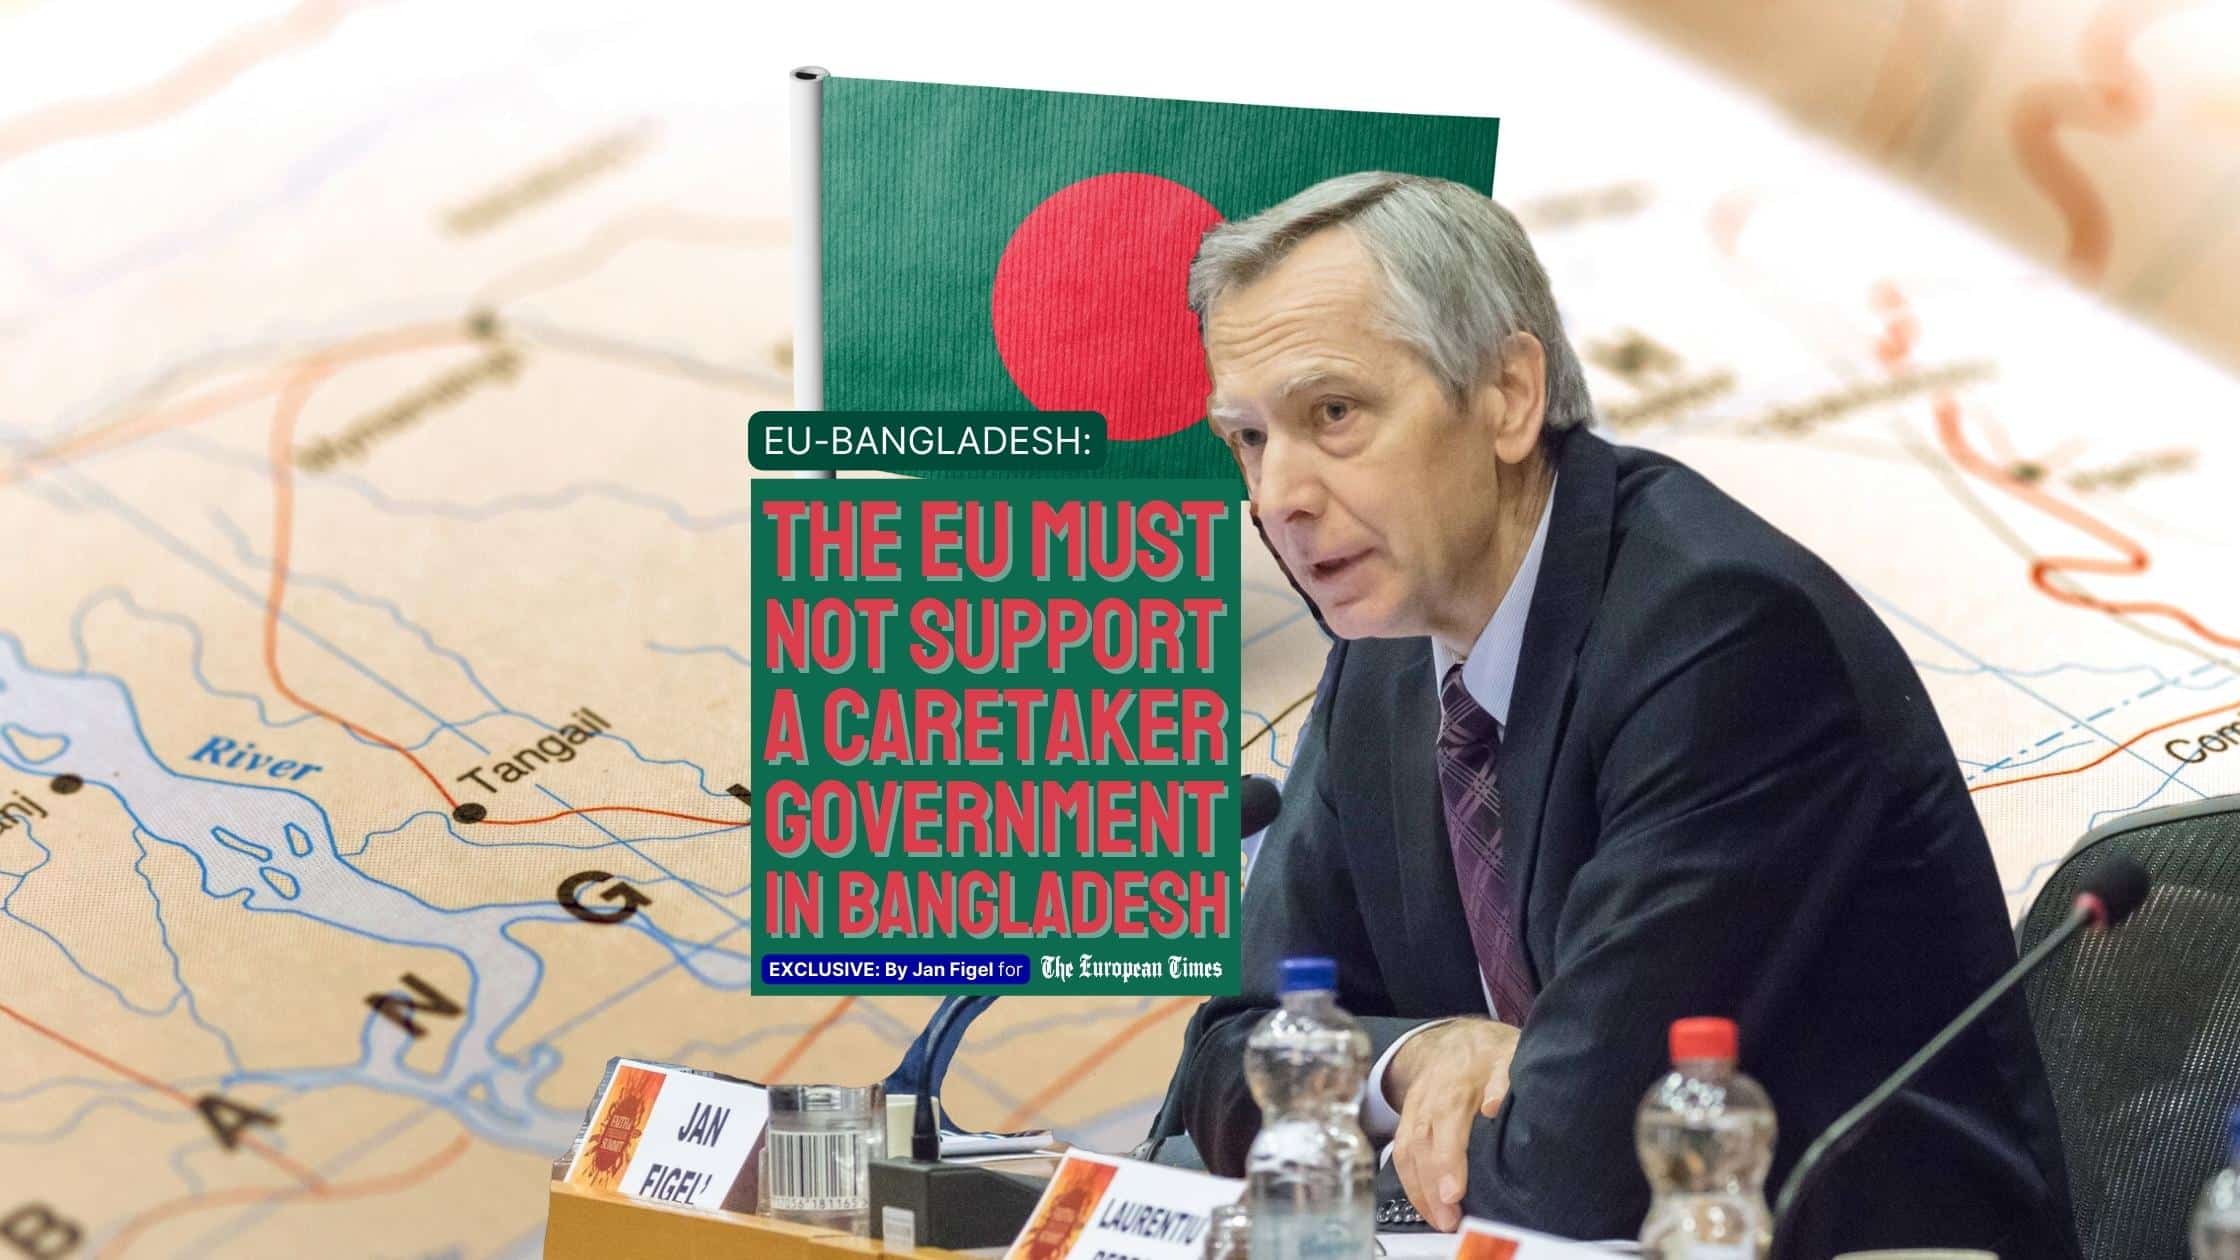 Jan Figel, The EU must not support a caretaker government in Bangladesh